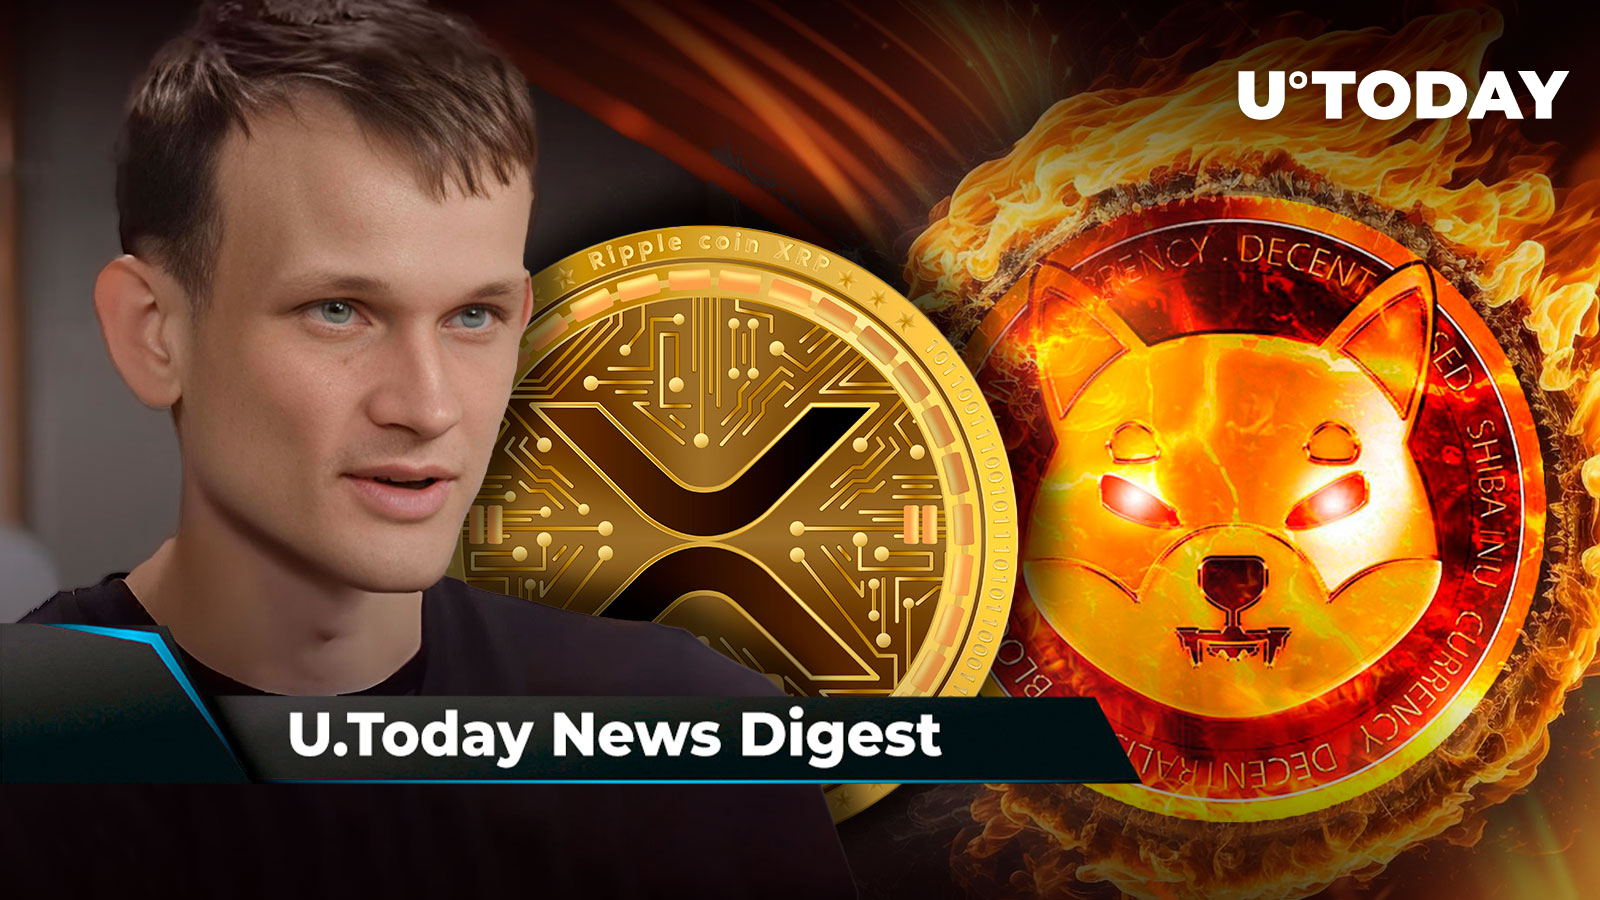 eth-insider-breaks-down-buterin-s-alleged-interest-in-ripple-and-xrp-quarter-billion-shib-destroyed-henrik-zeberg-shares-new-target-price-for-btc-rally-crypto-news-digest-by-u-today